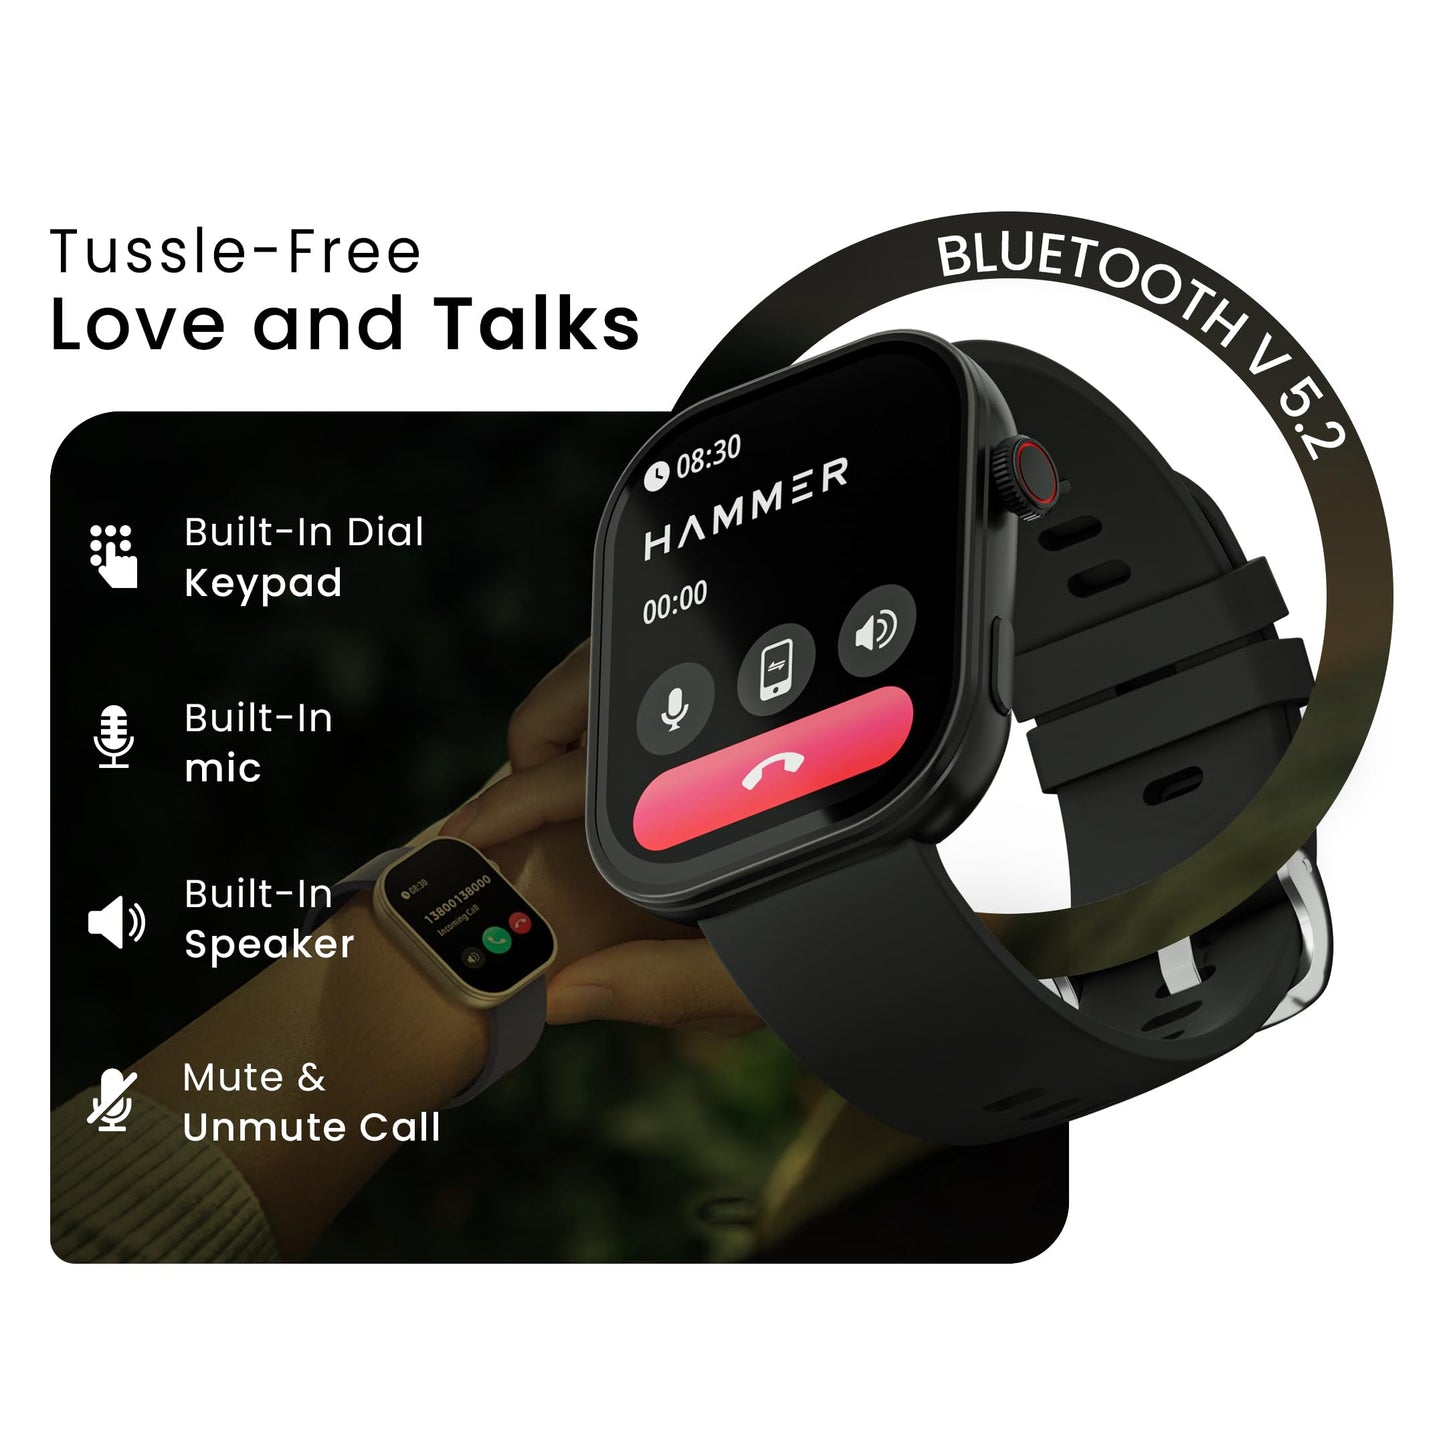 Hammer Tussle 2.01" HD Display Smart Watch, Bluetooth Calling, Rotating Crown, Voice Assistant, In-Built Games, Smart Notifications, Customized Watchfaces, Sports Mode, DND, Raise to Wake Powder Black